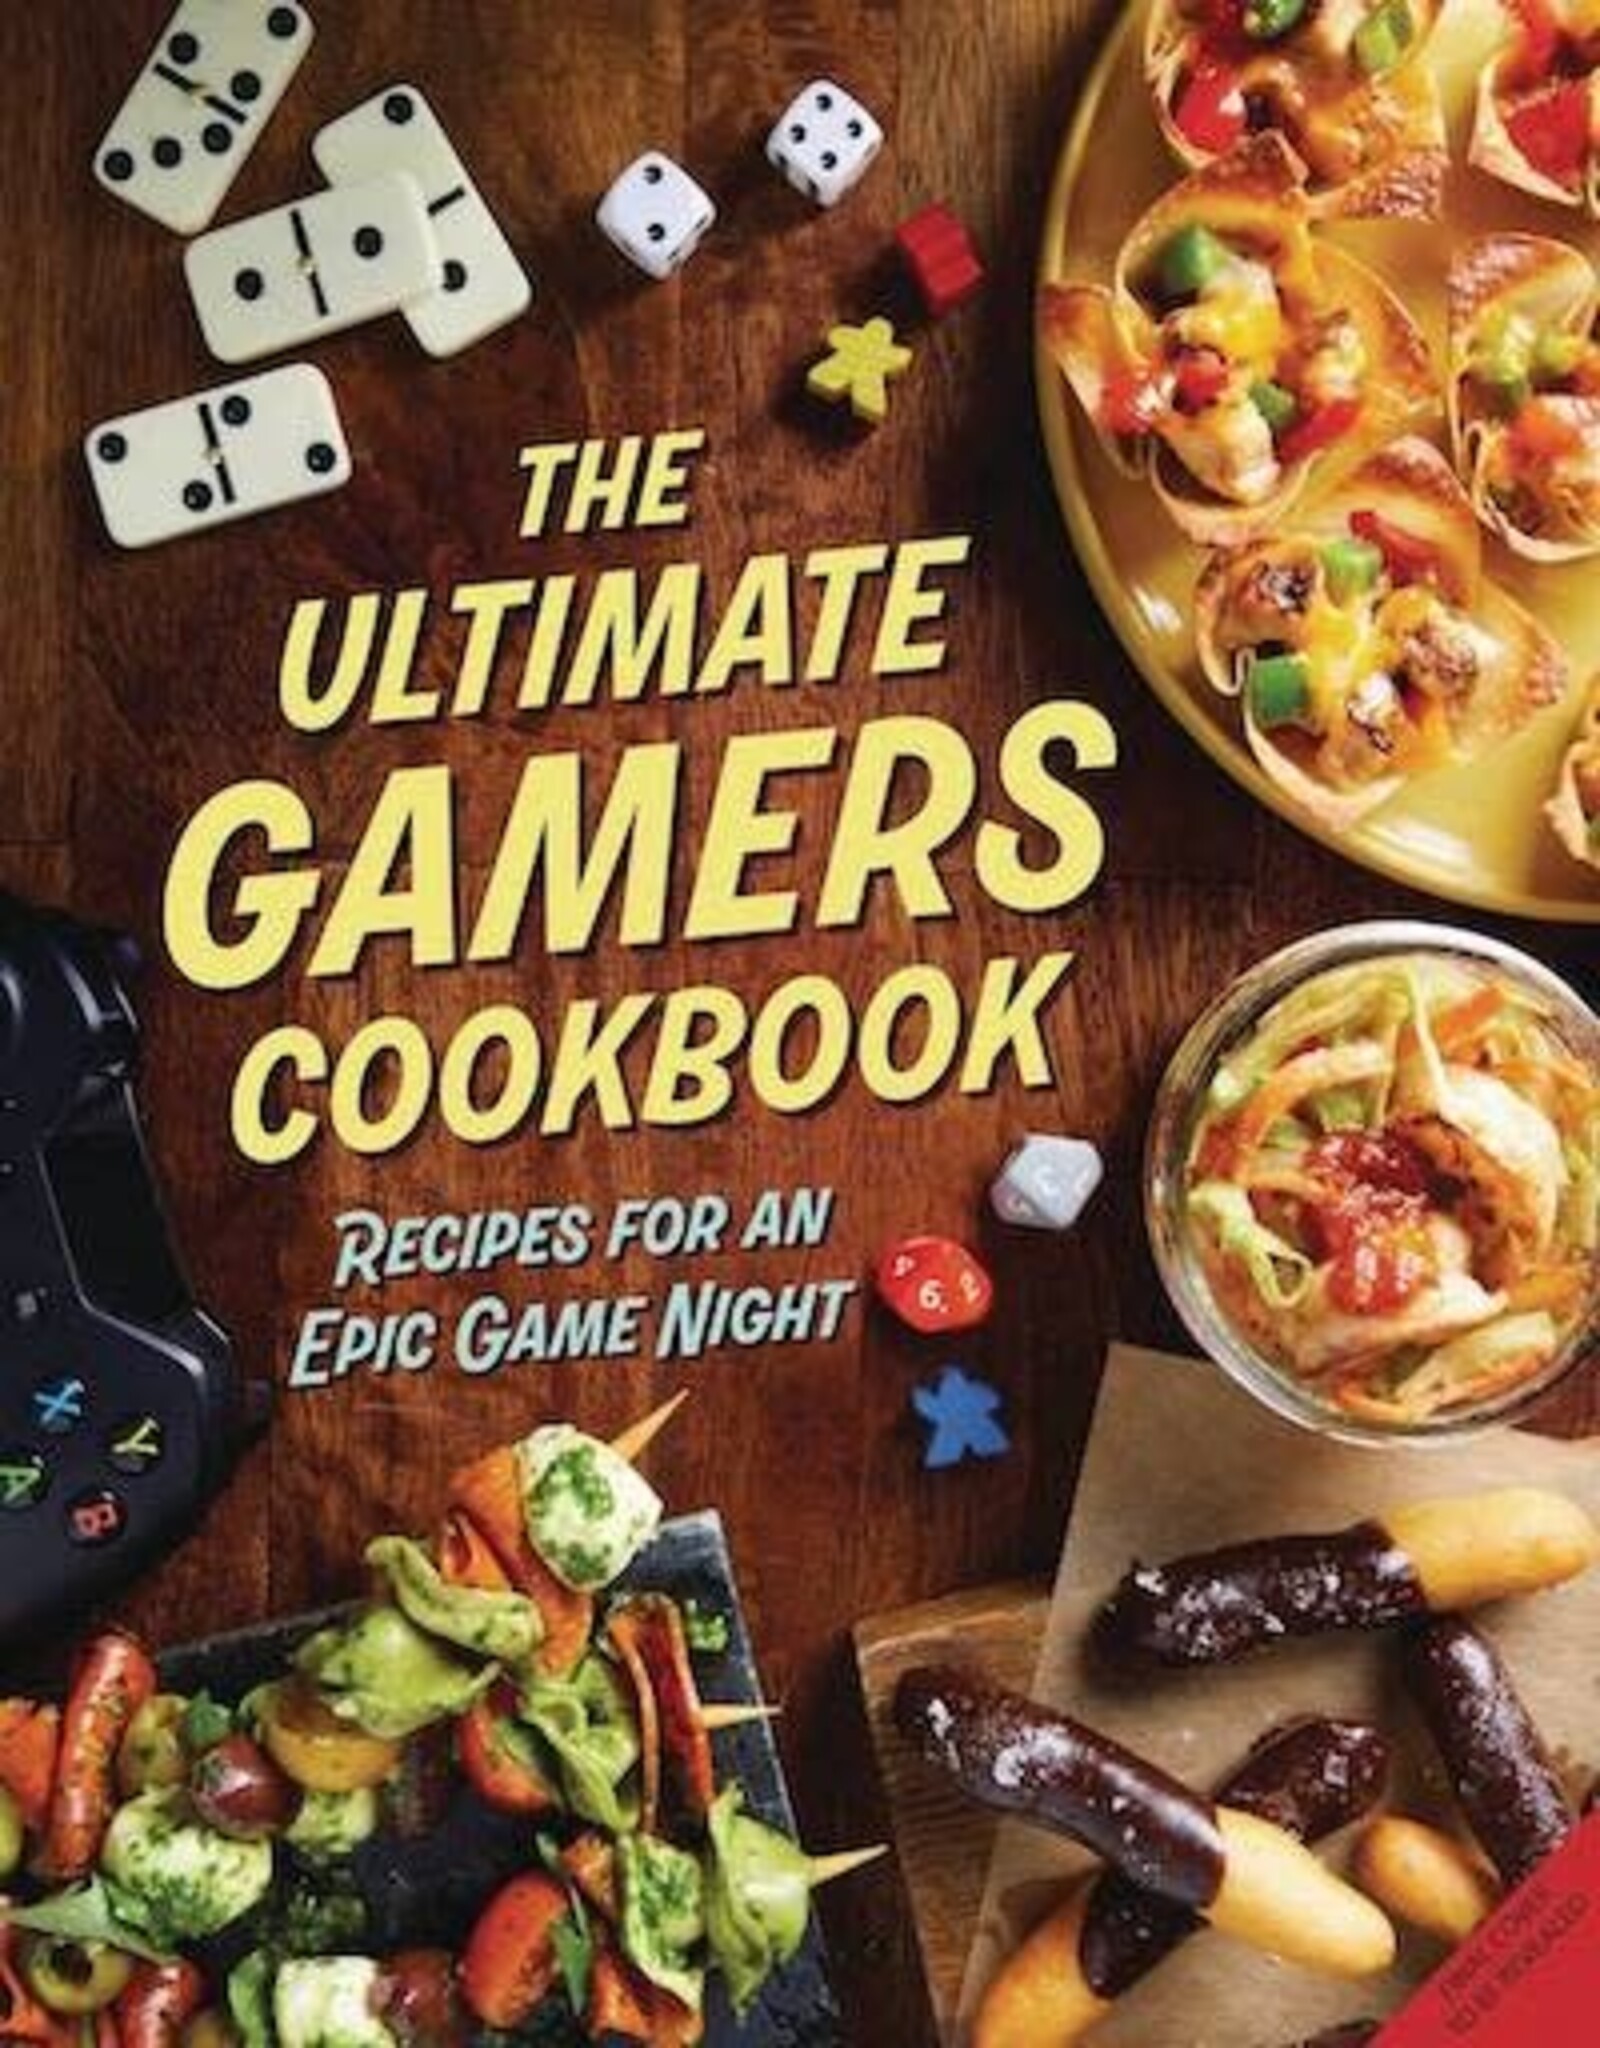 Insight Editions Ult Gamers Cookbook Recipes Epic Game Night HC